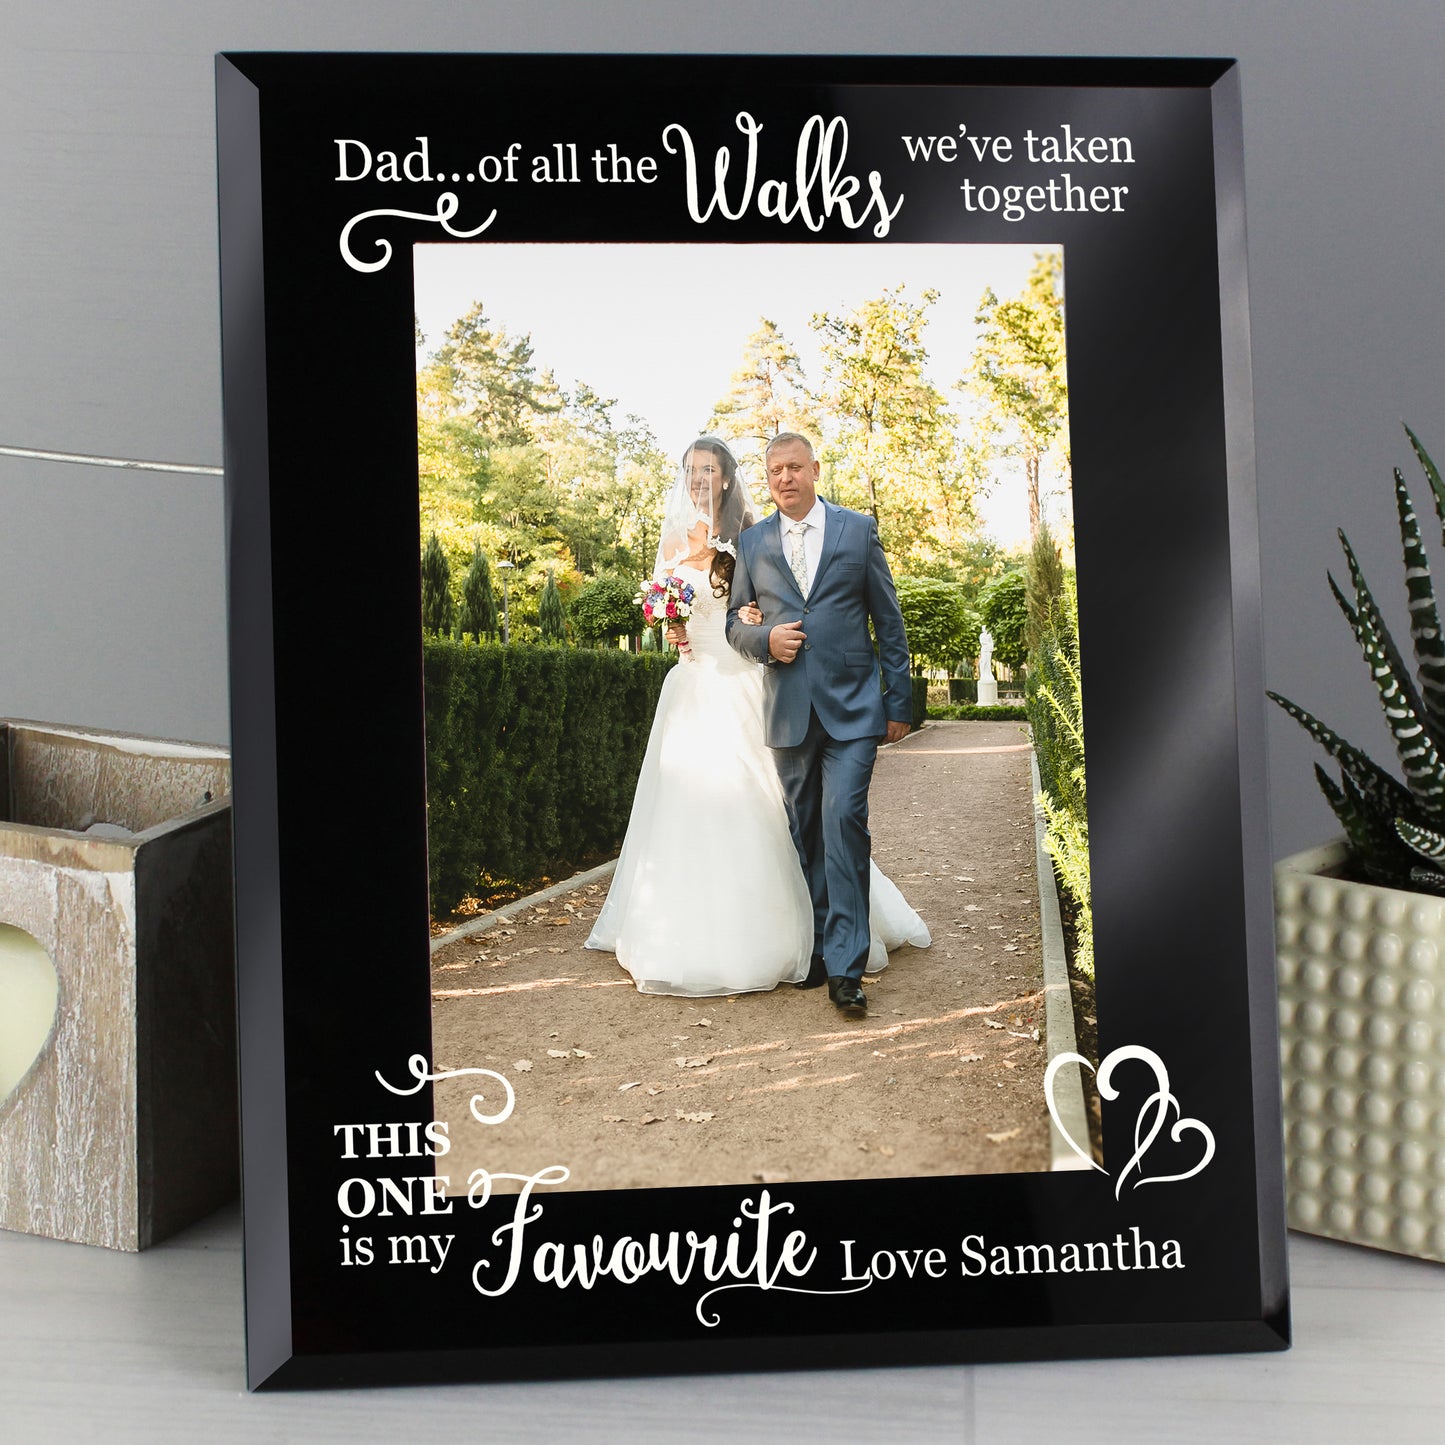 Personalised Of All the Walks... Wedding 5x7 Black Glass Photo Frame - Personalise It!